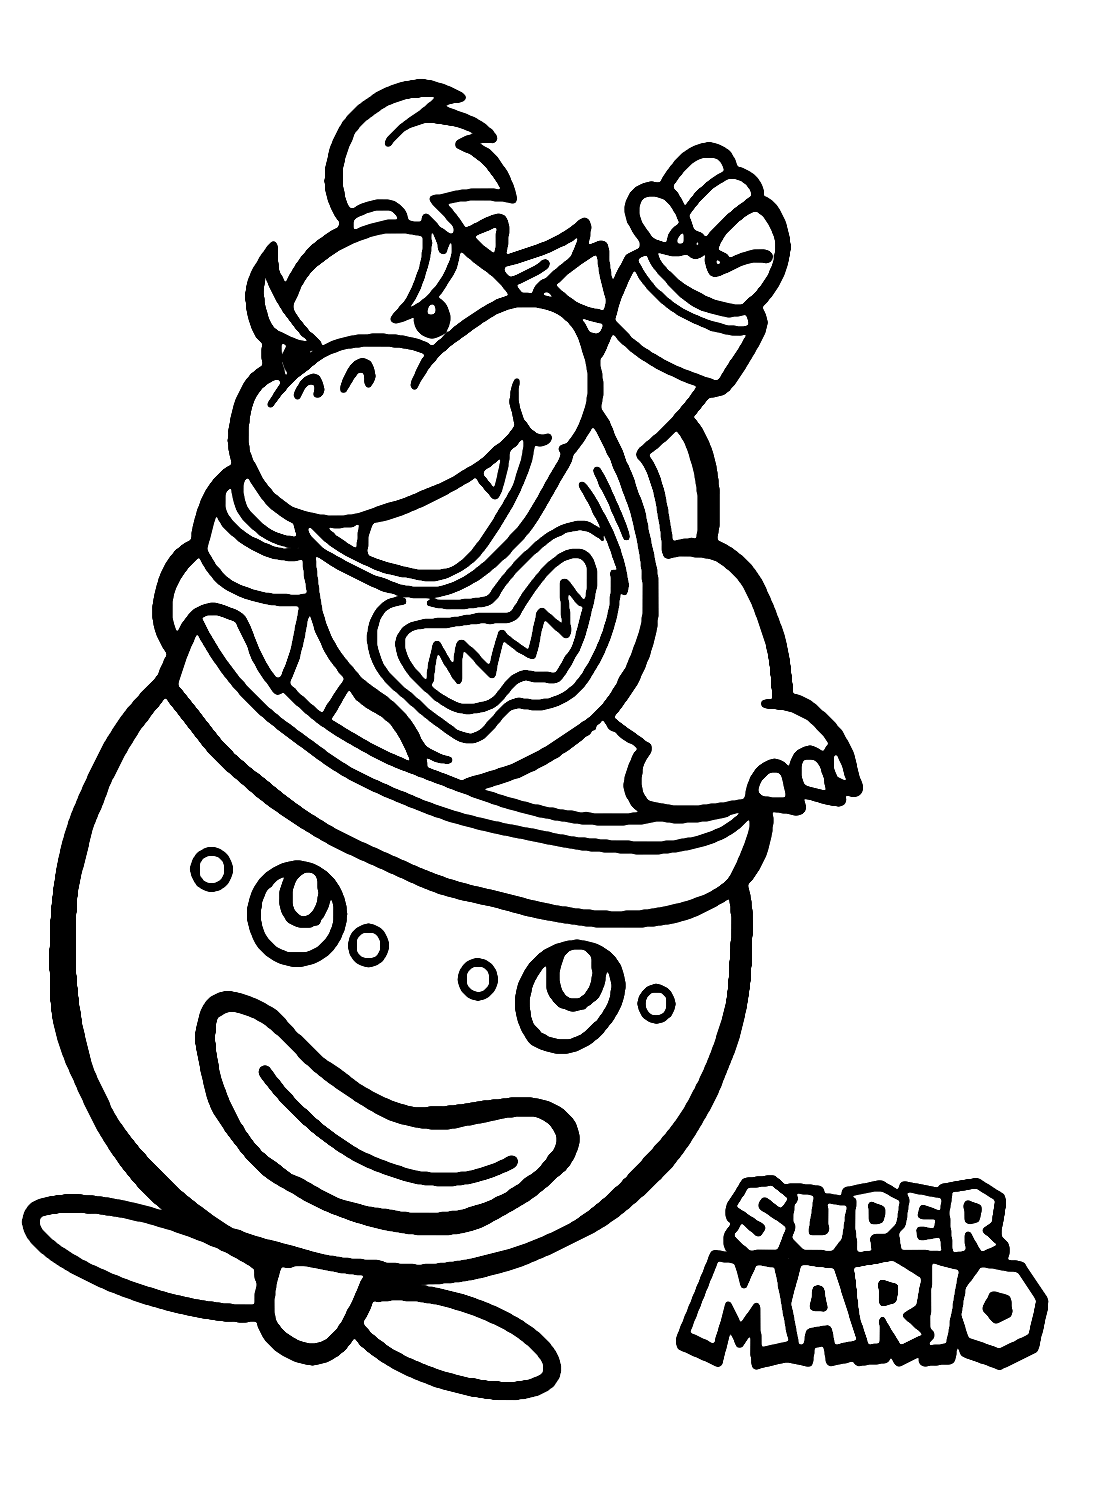 Bowser Jr. from Super Mario Coloring Pages Bowser Jr Coloring Pages